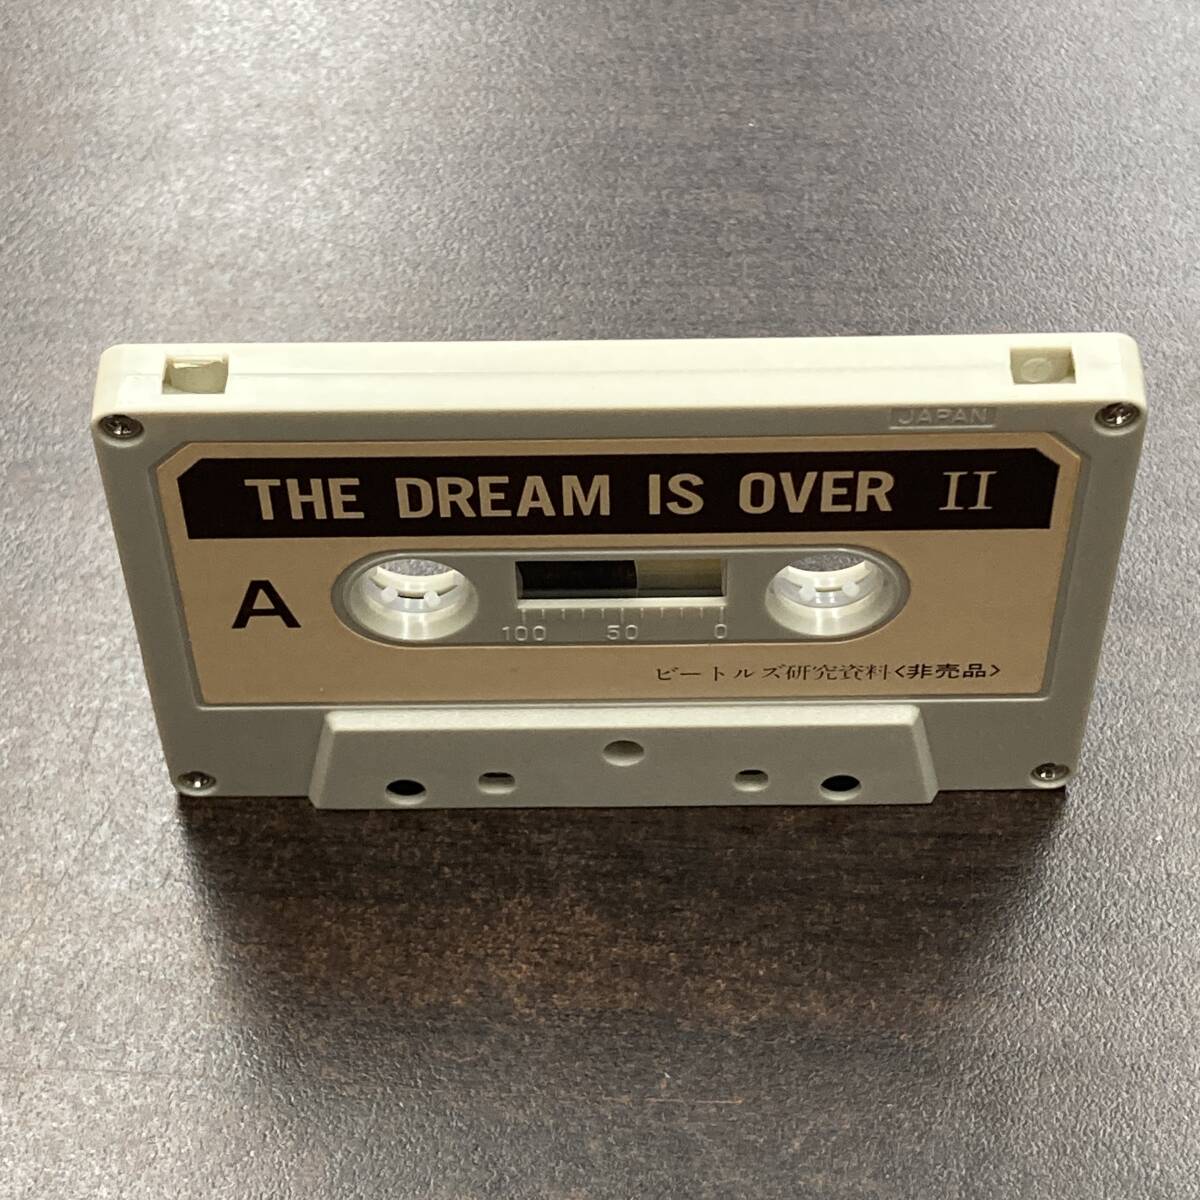 1227Mw ザ・ビートルズ 研究資料 THE DREAM IS OVER 2 カセットテープ / THE BEATLES Research materials Cassette Tapeの画像2